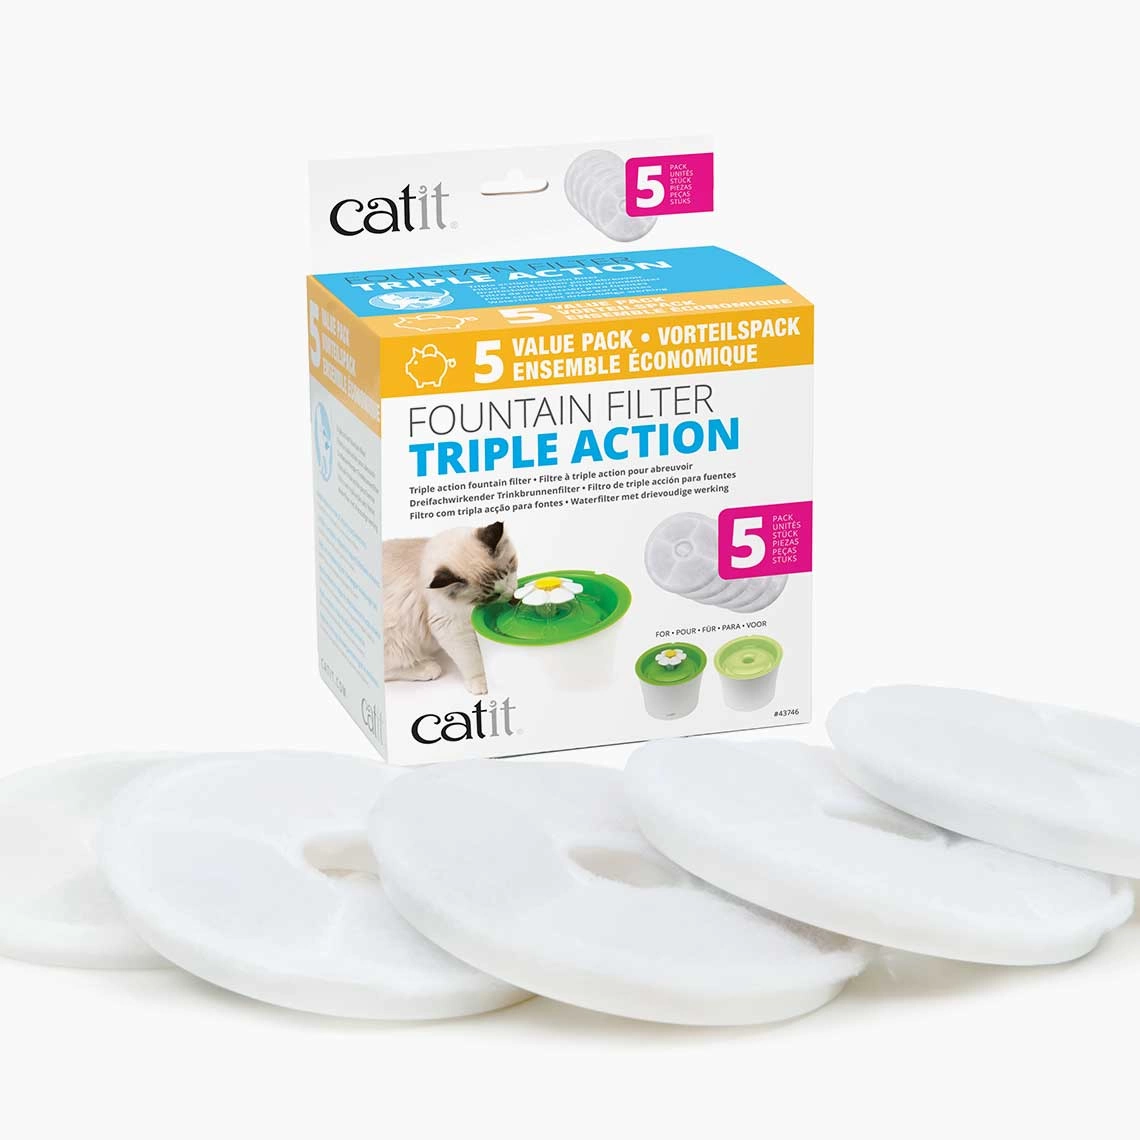 Catit - Catit Triple Action Fountain filter - 5 Pack